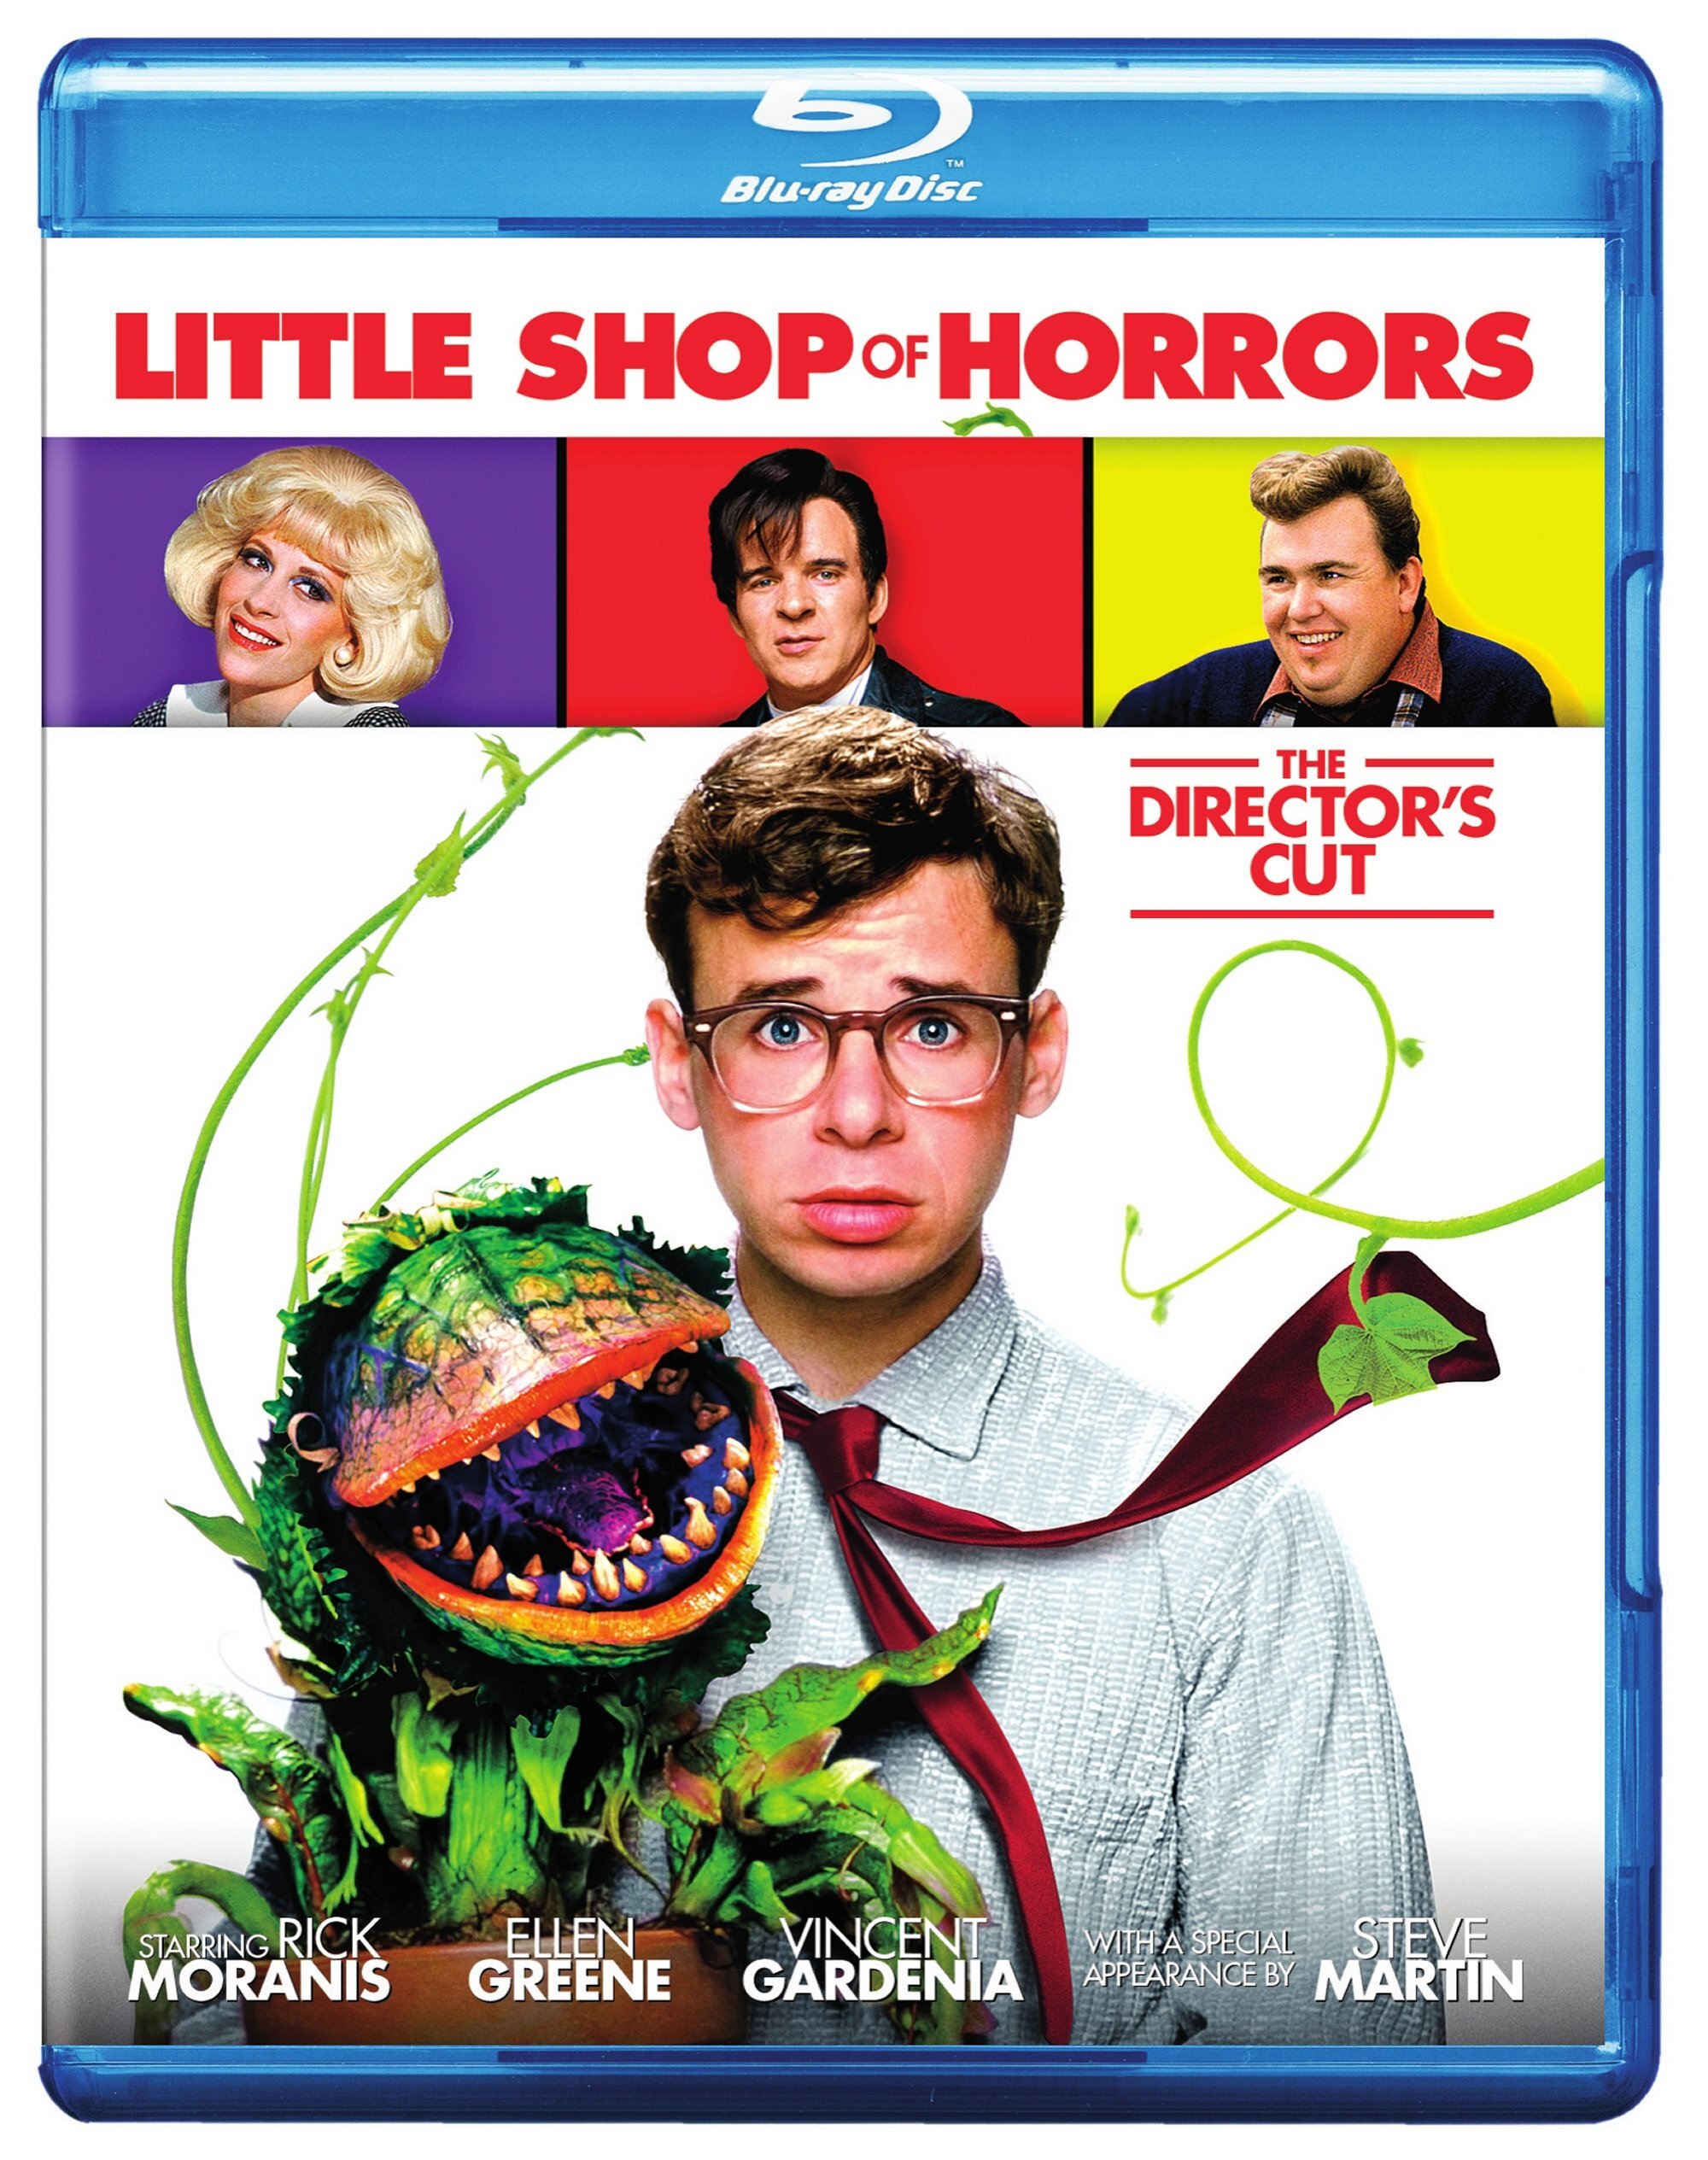 Little Shop Of Horrors (Blu-ray Director's Cut) - Blu-ray [ 1986 ]  - Musical Movies On Blu-ray - Movies On GRUV